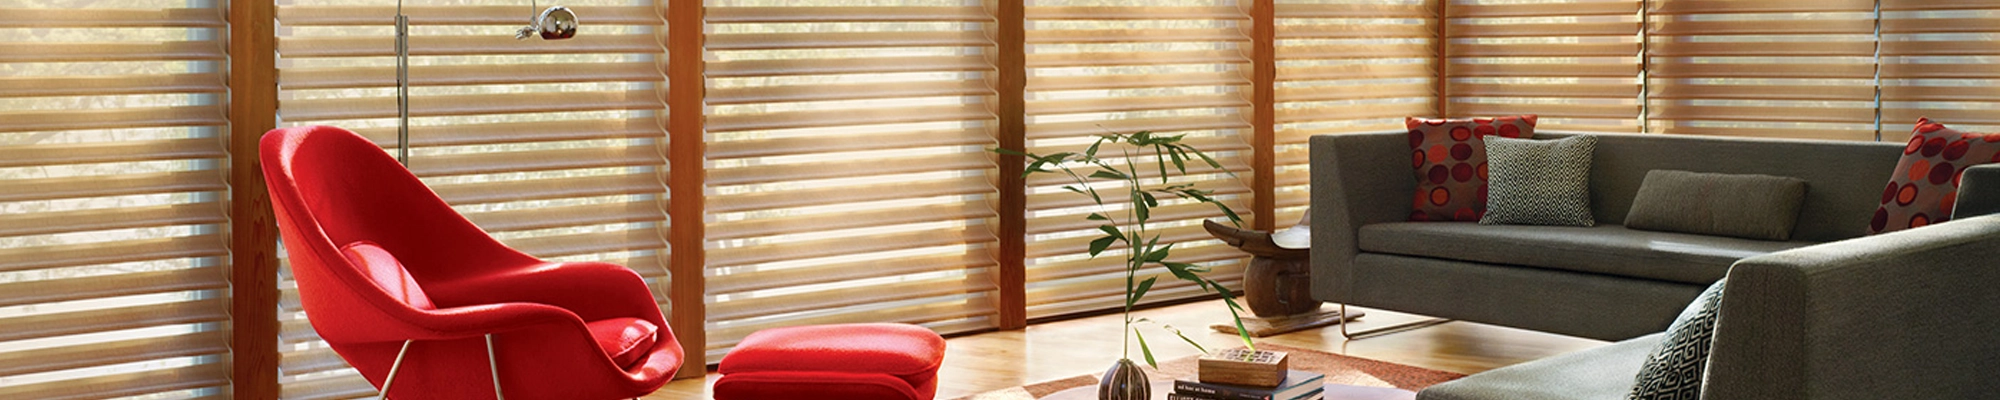 Window treatments provided by Design Network COLORTILE